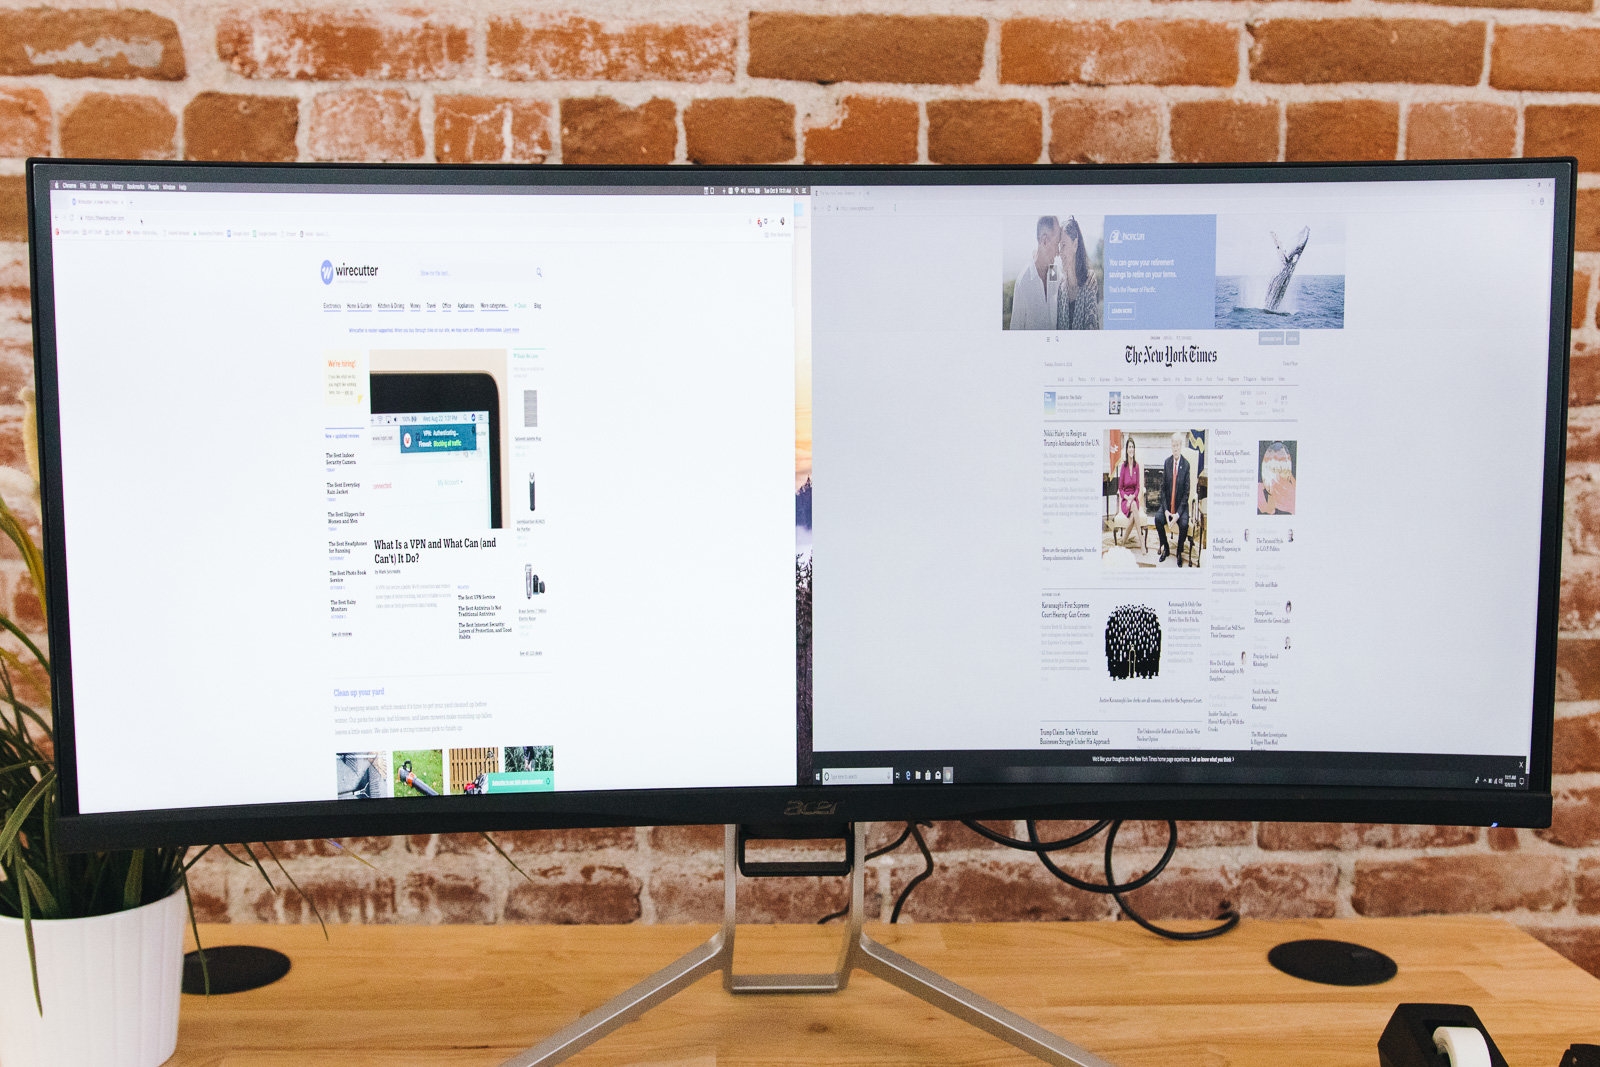 The best ultrawide monitors | DeviceDaily.com